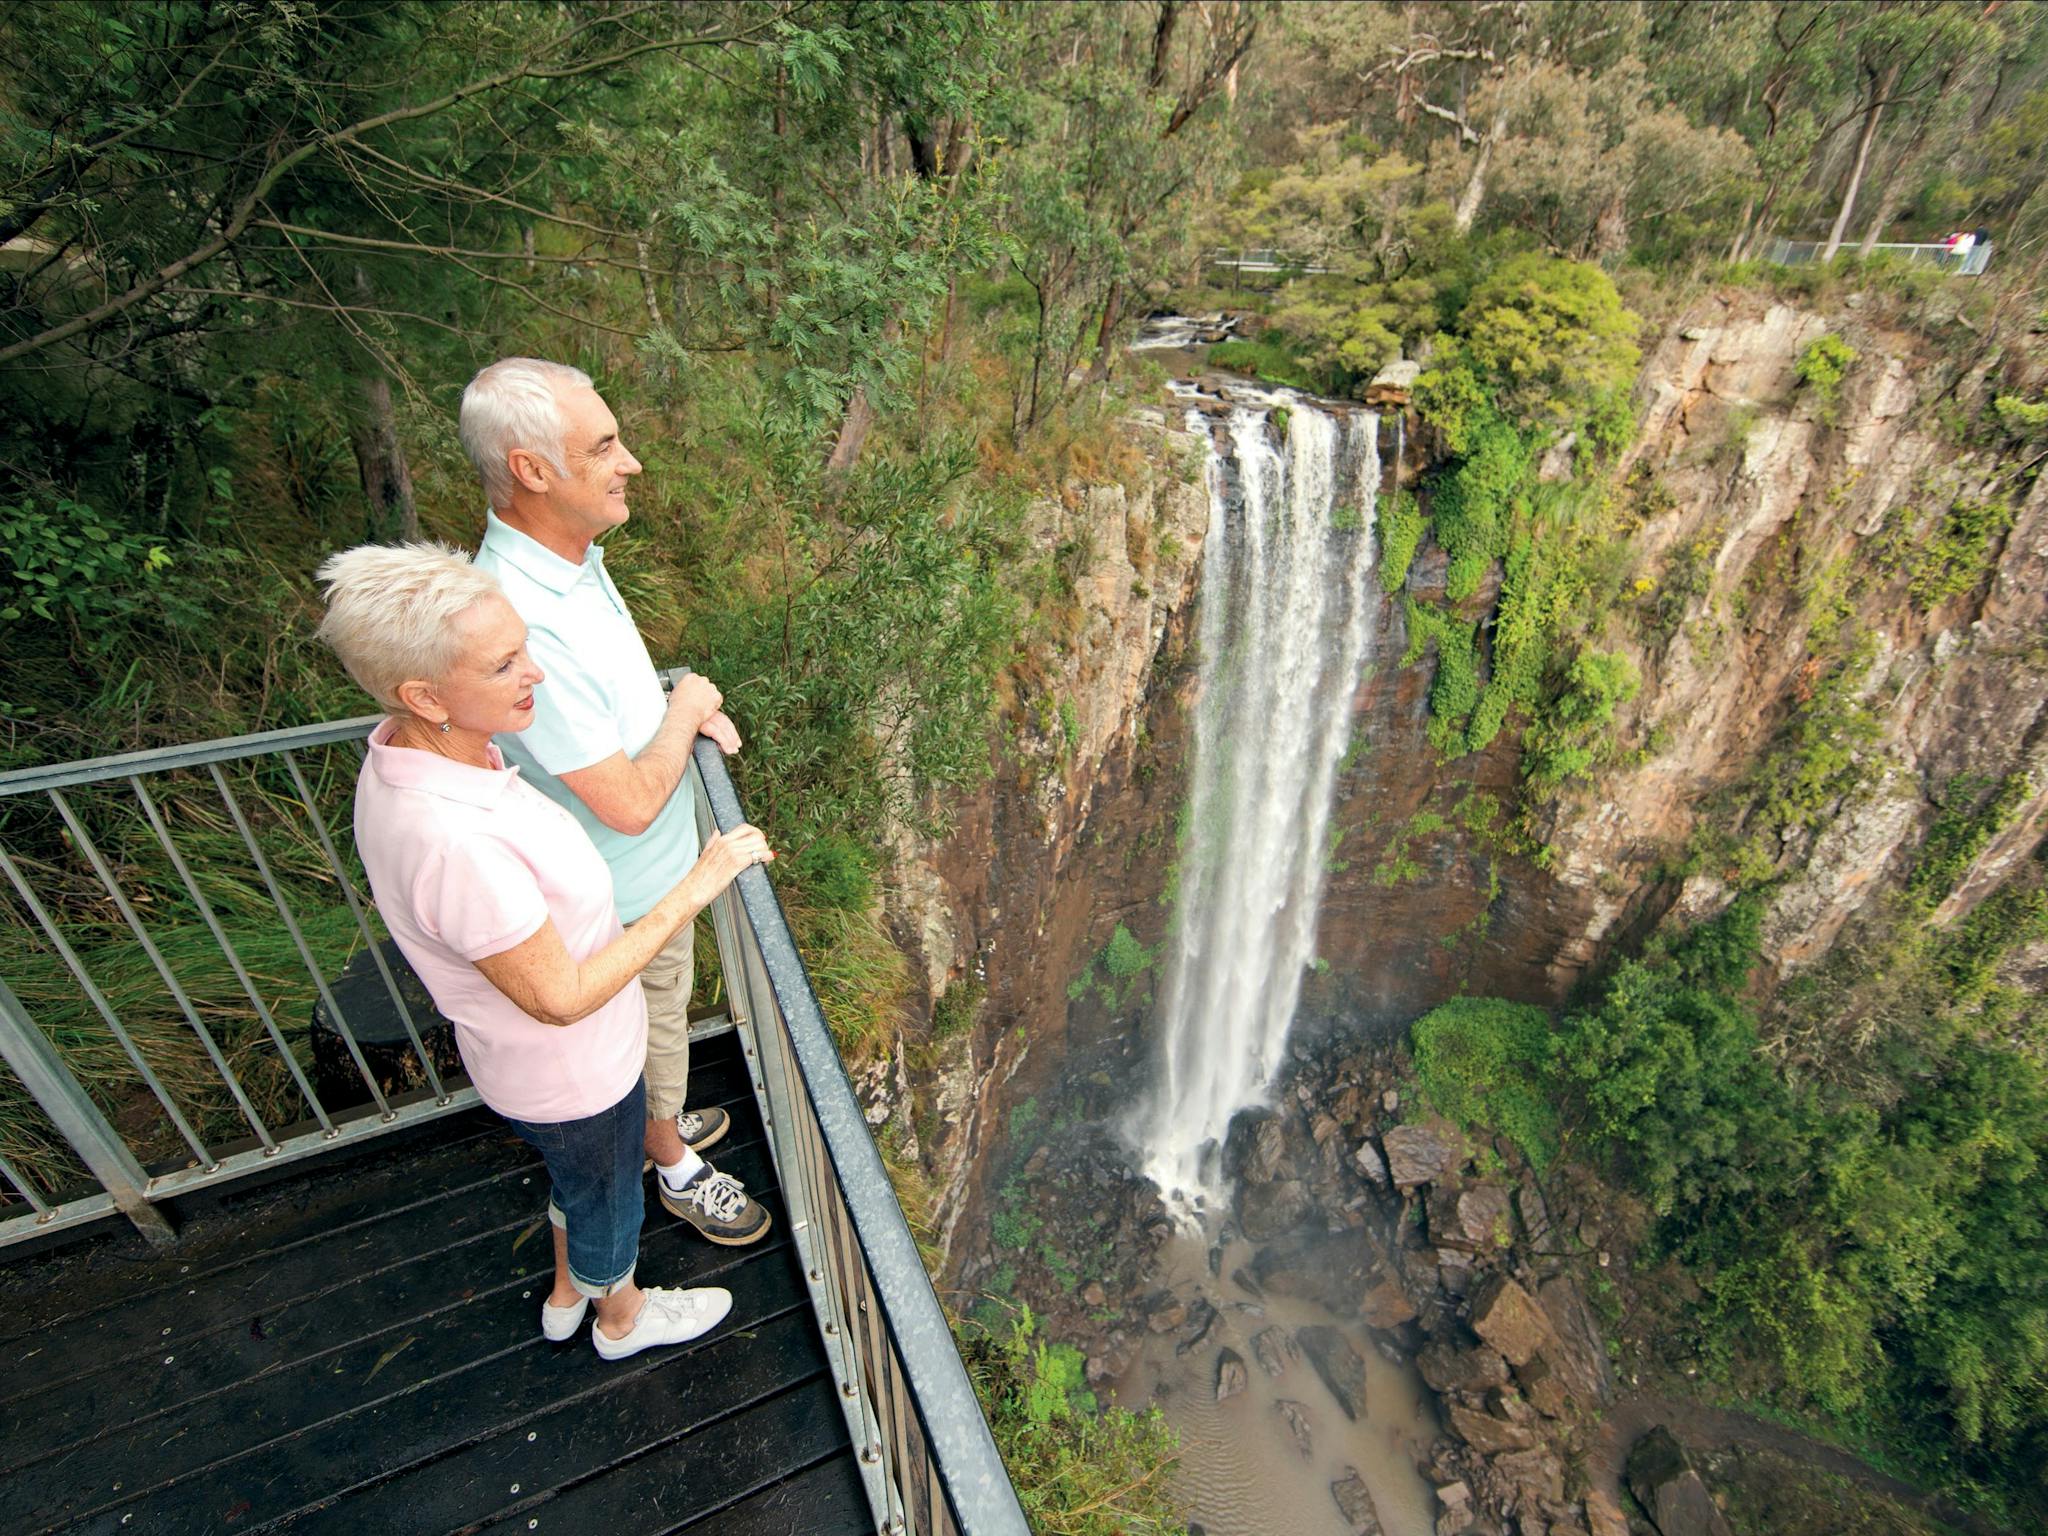 Couple on viewing deck overlooking falls.